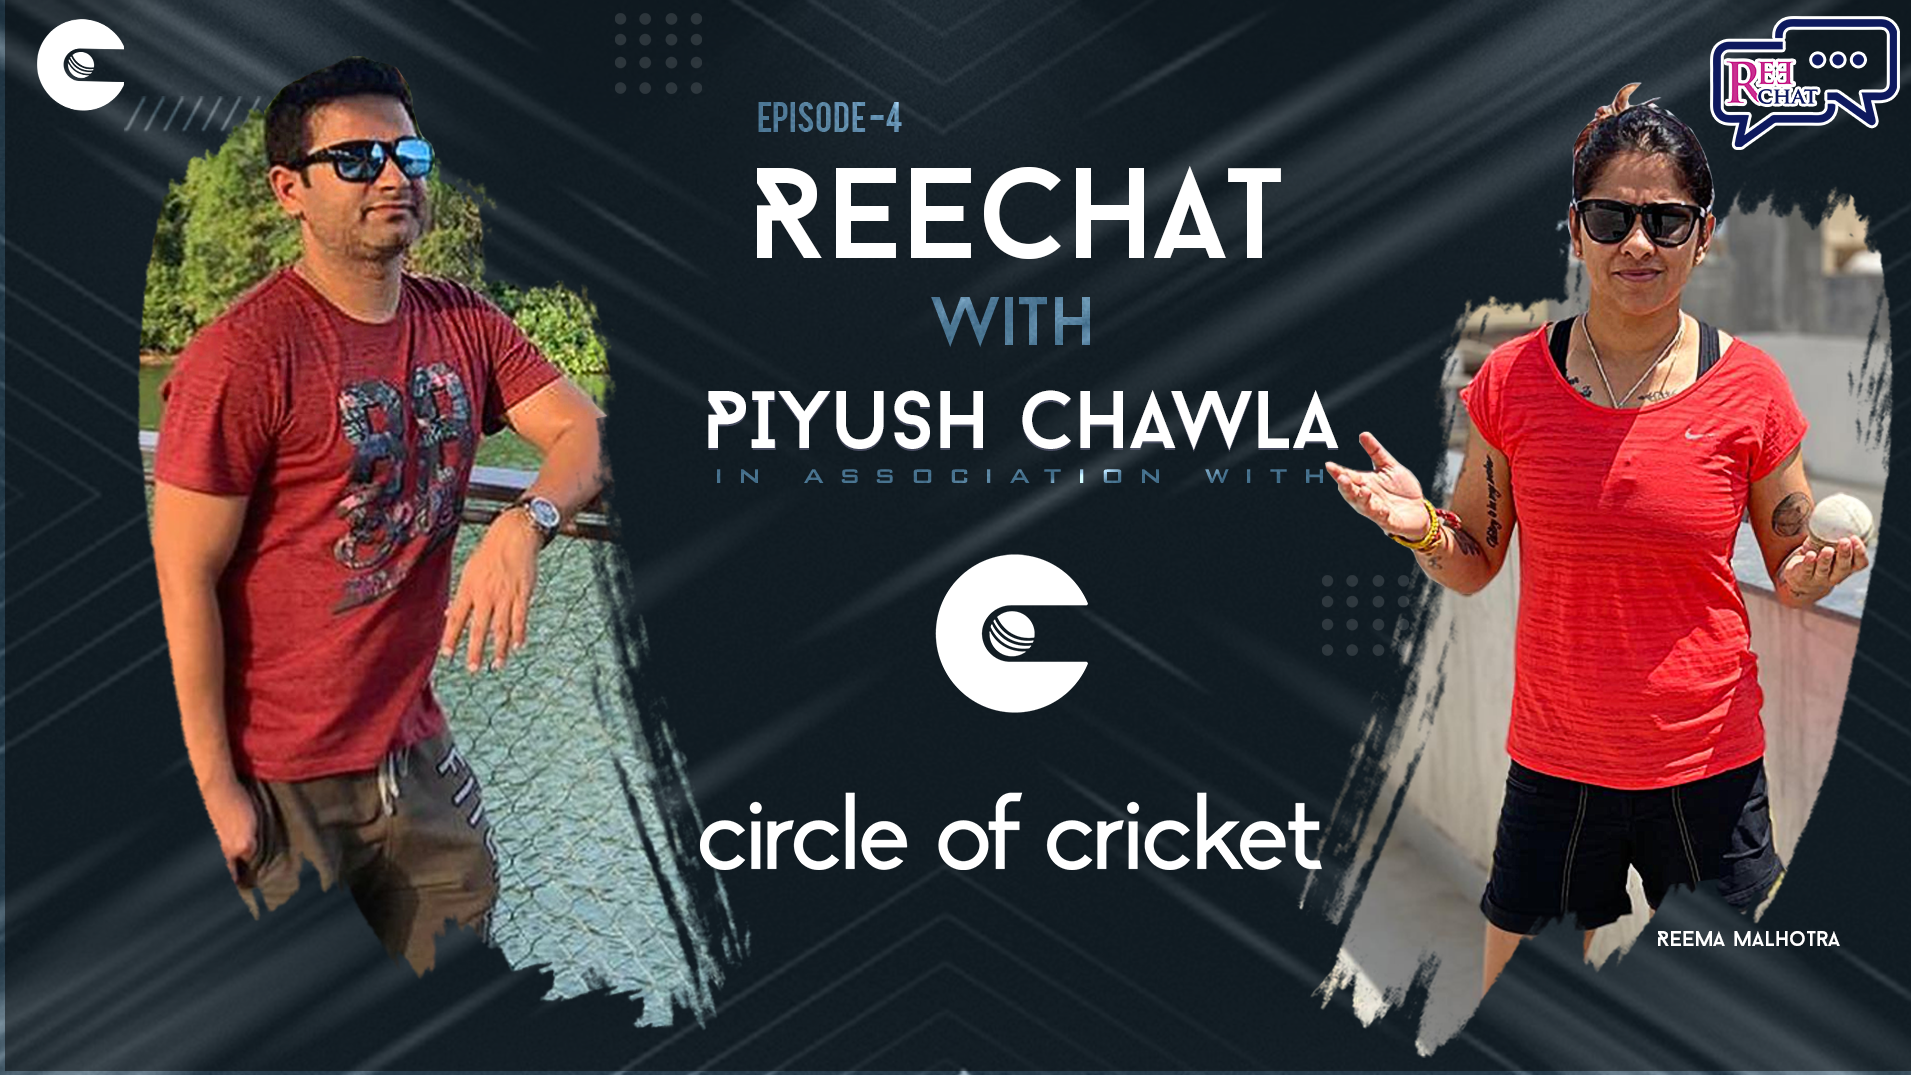 Exclusive: Circle of Cricket presents REECHAT hosted by Reema Malhotra; Episode. 4 feat. Piyush Chawla